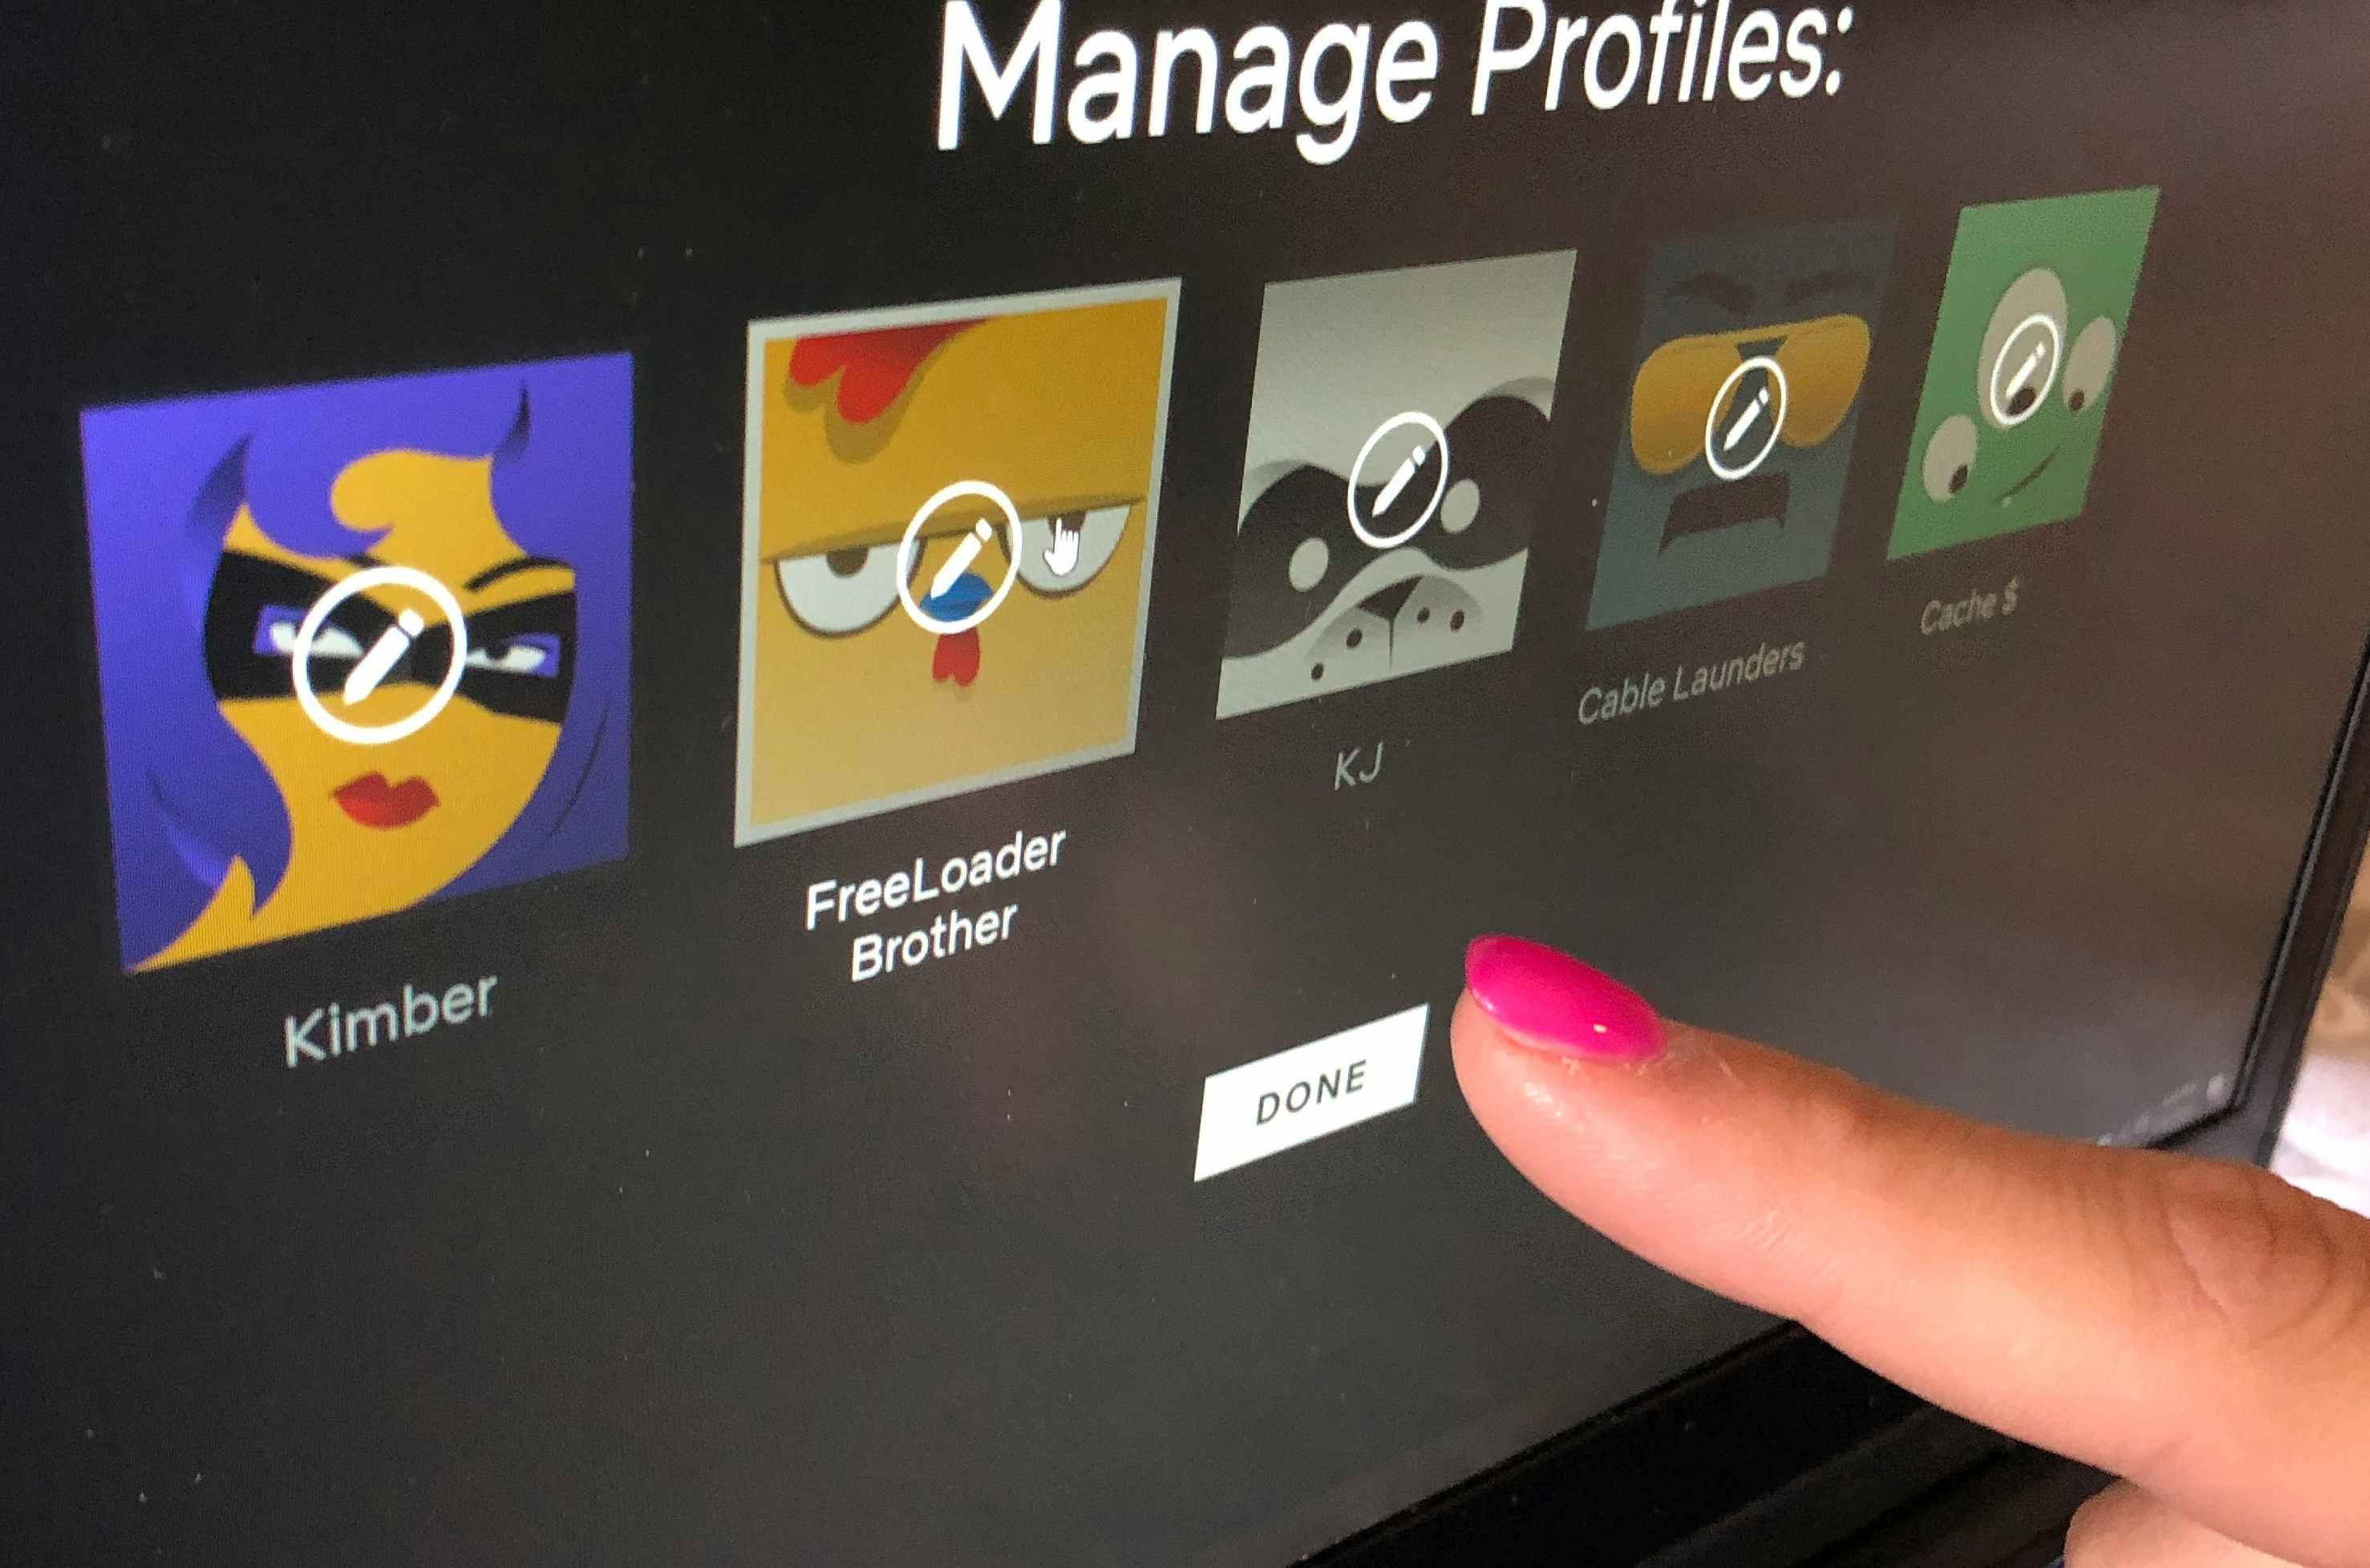 A person's finger pointing to a profile displayed on Netflix that is titled "Free Loader Brother